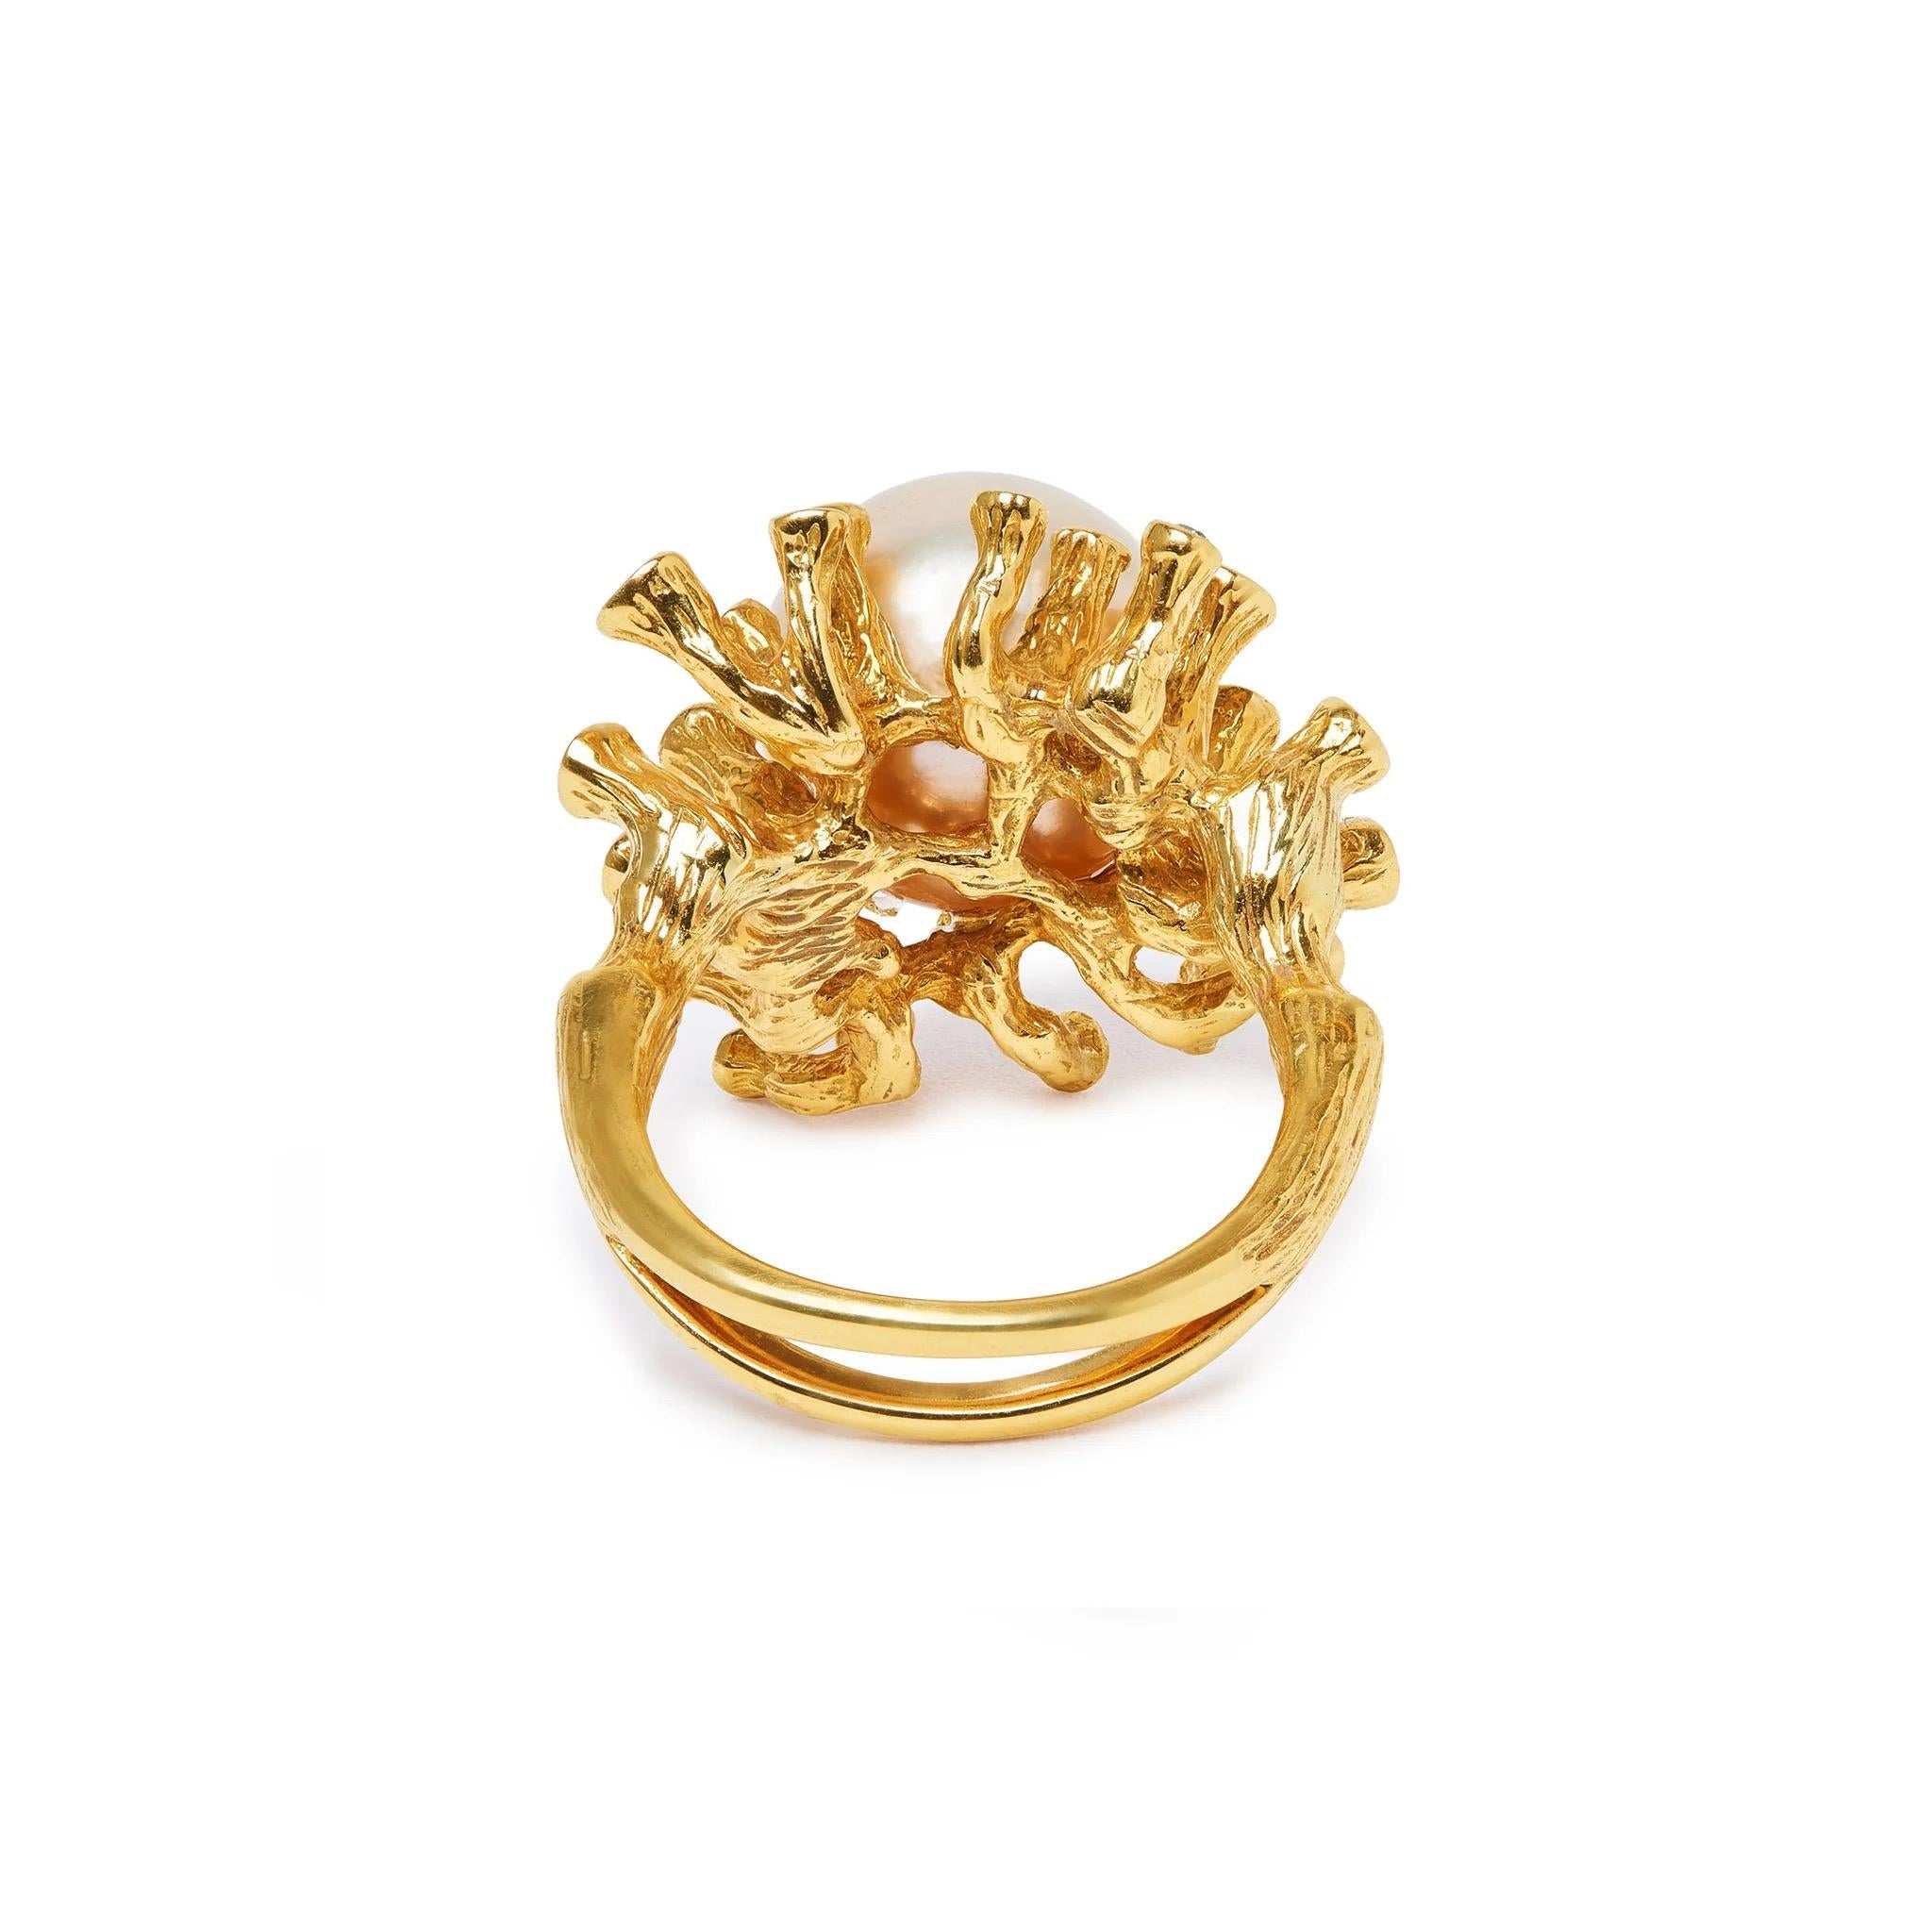 A handpicked Golden South Sea Pearl is surrounded with textured Diamond branches in 18k yellow gold in this stunning cocktail ring. Inspired by the beauty of coral, its intricate detailing and craftsmanship make a sublime statement.

Handmade 18k